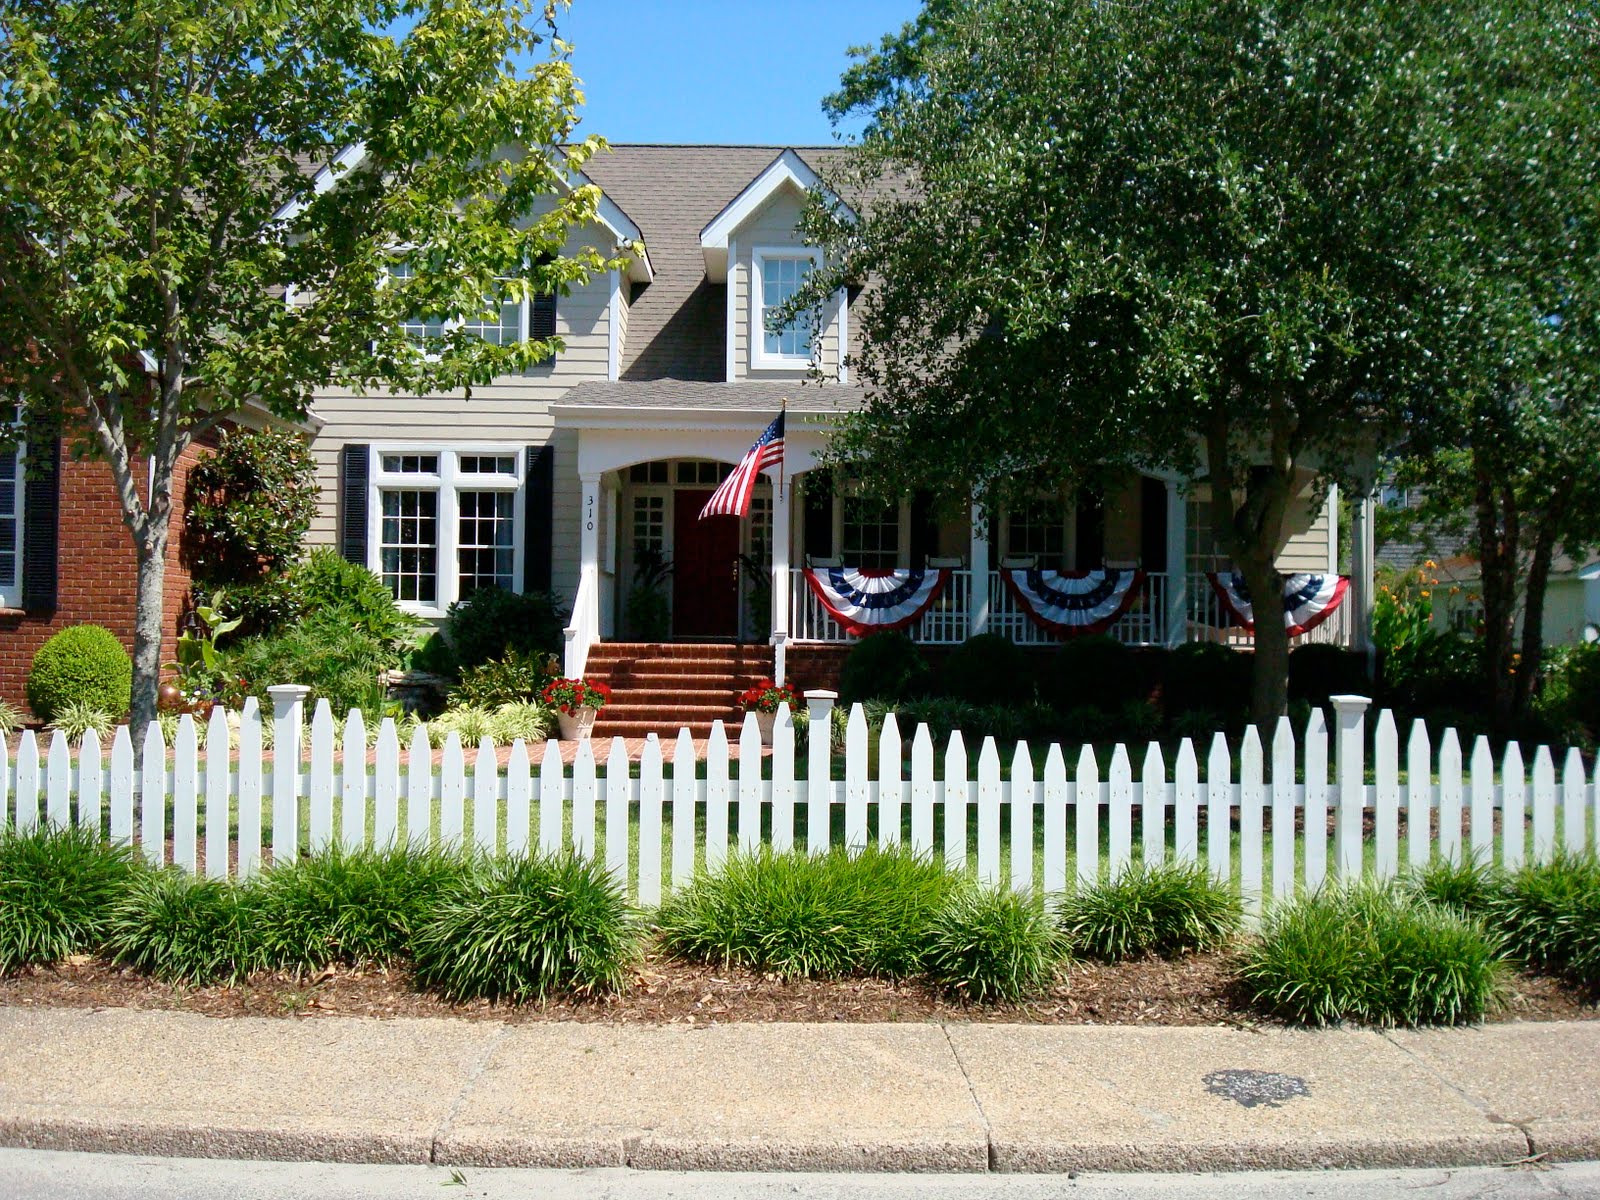 Living the American Dream with a White Picket Fence!